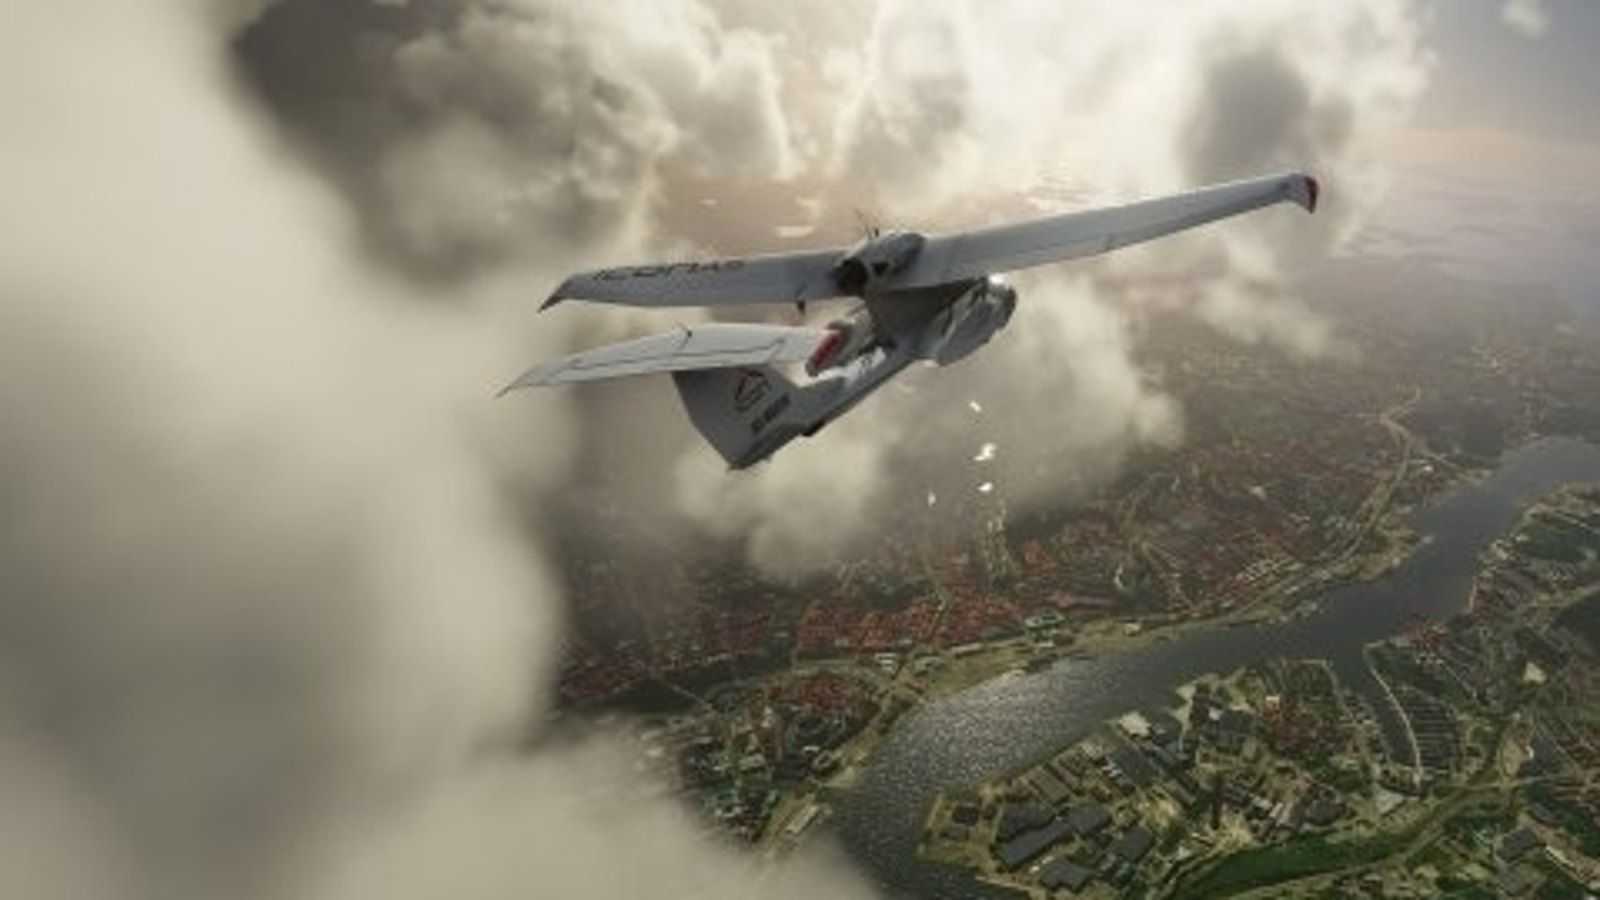 Microsoft Flight Simulator 2024 has been revealed! ✈️ The game is a  follow-up to the very impressive Microsoft Flight Simulator (2020)…